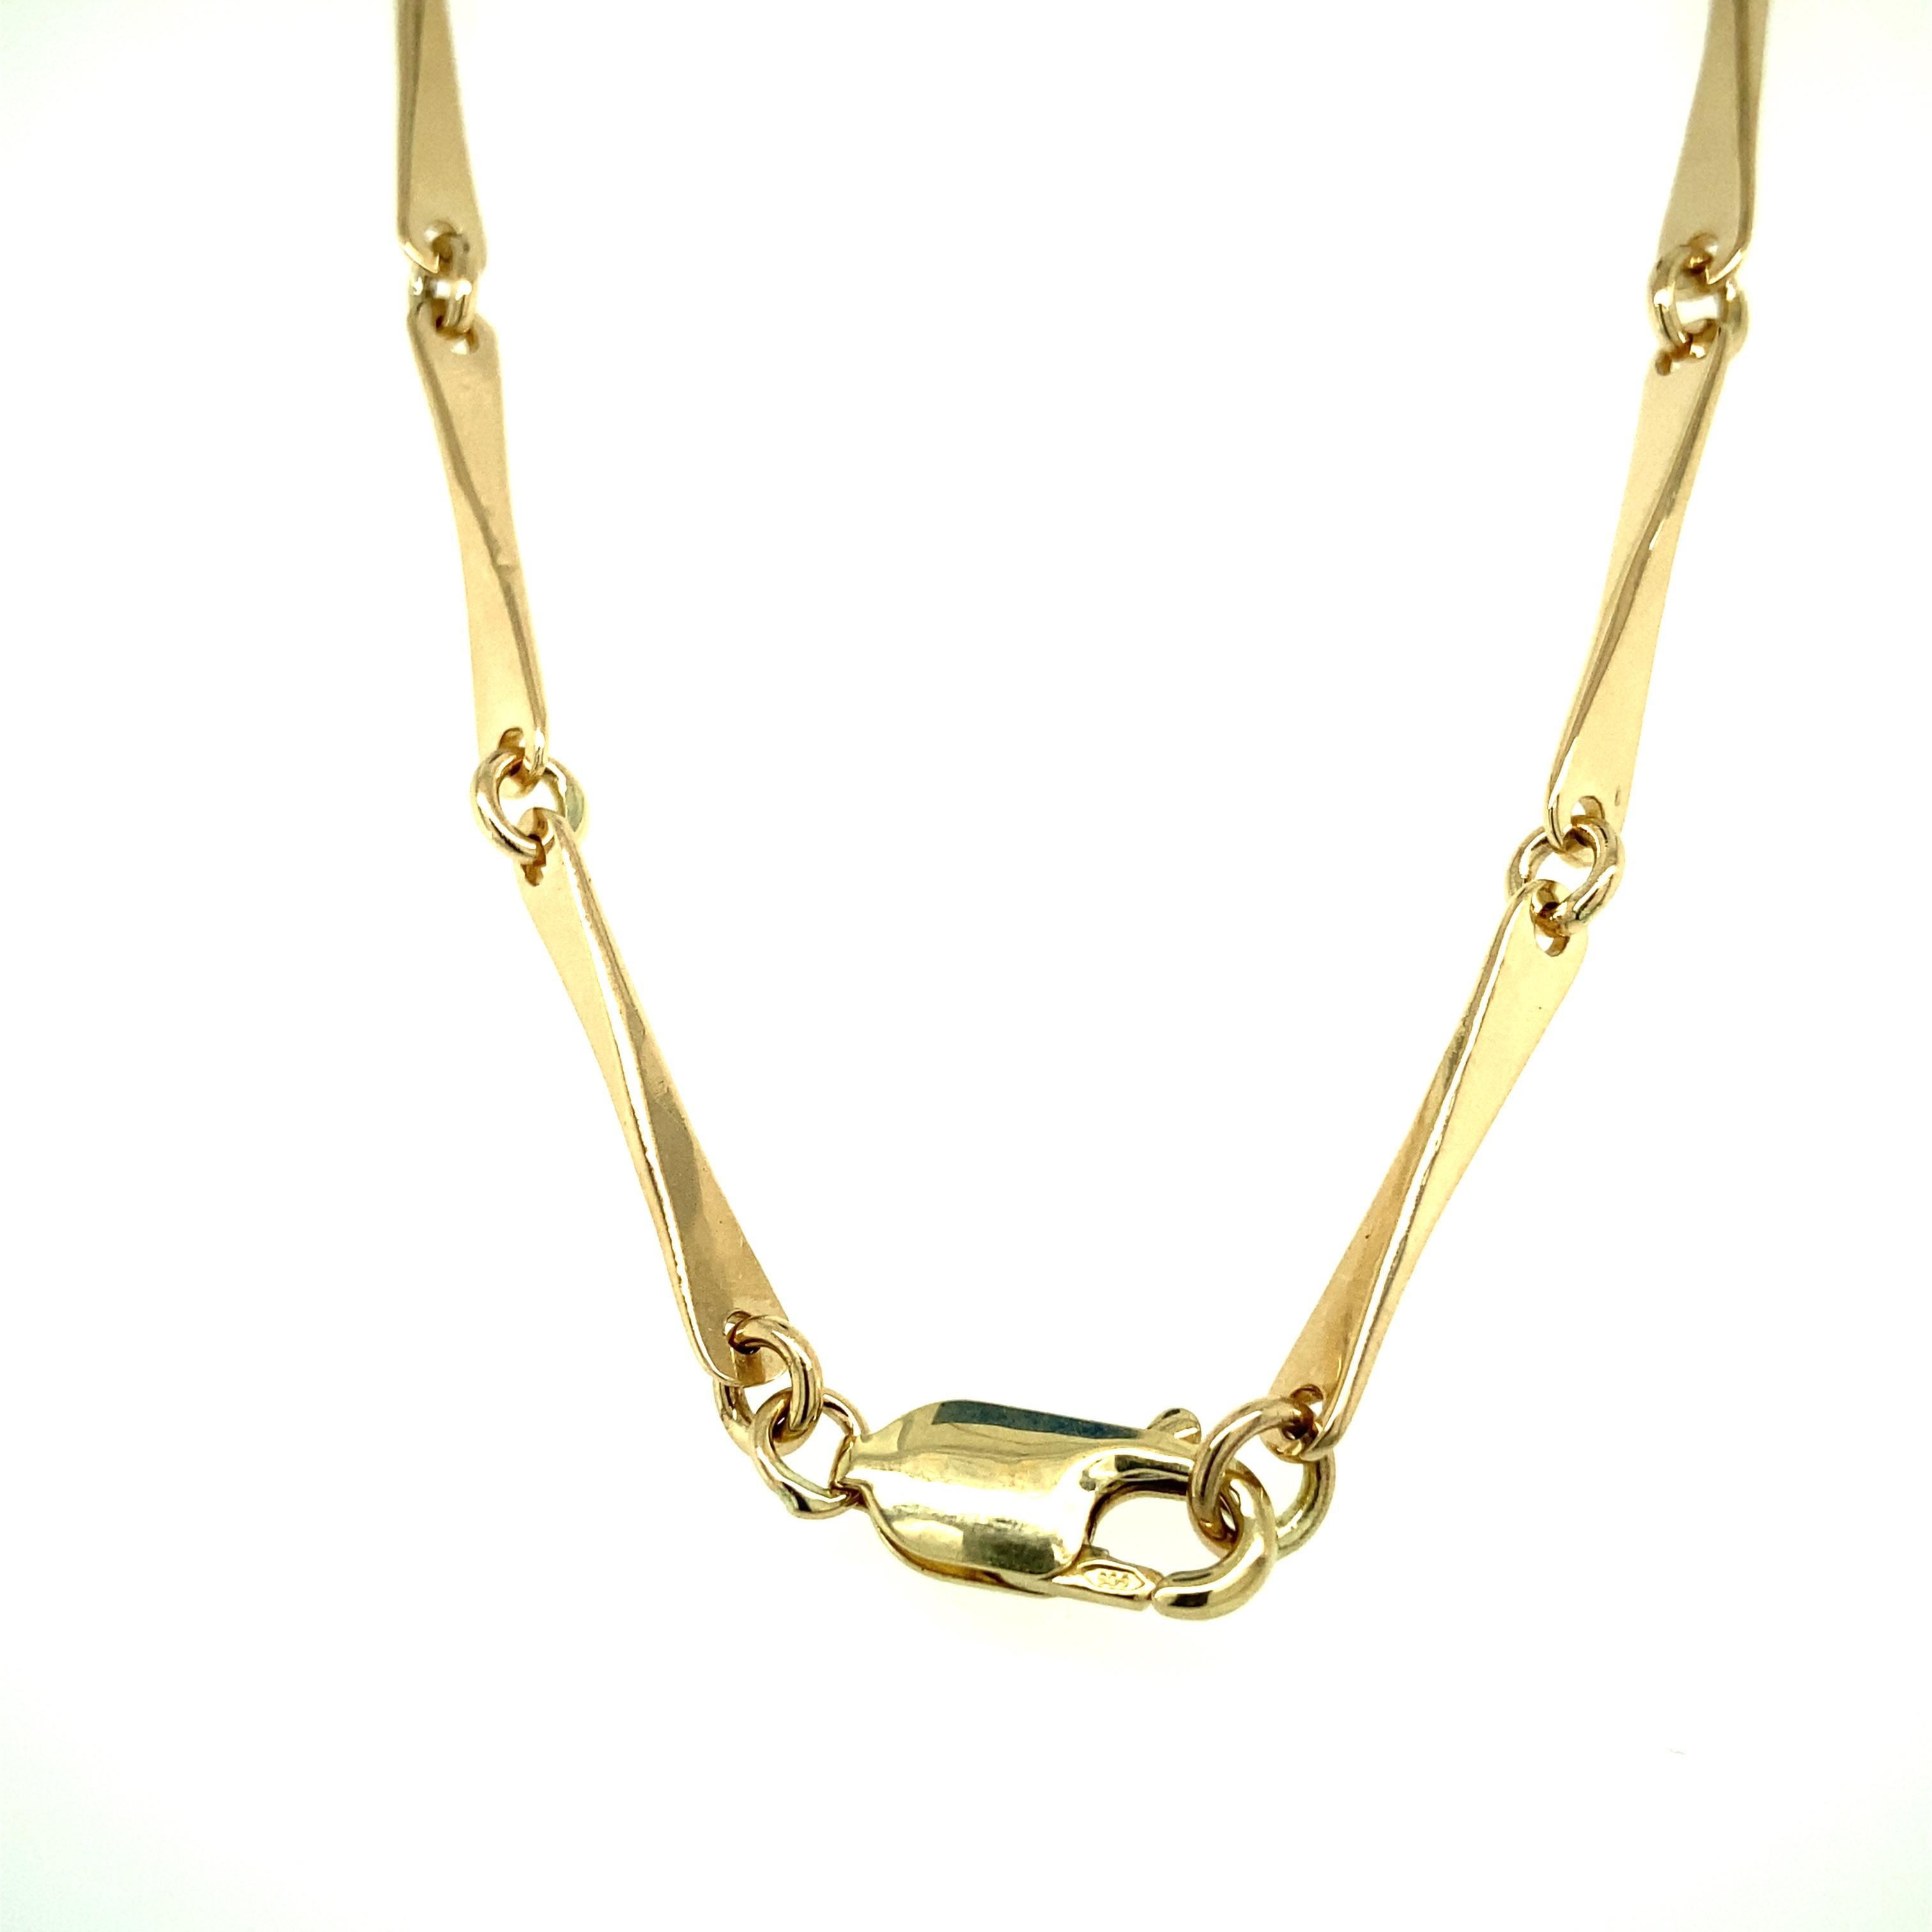 One 14 karat yellow gold (stamped 585) estate bar link chain measuring 19 inches in length complete with a lobster clasp.